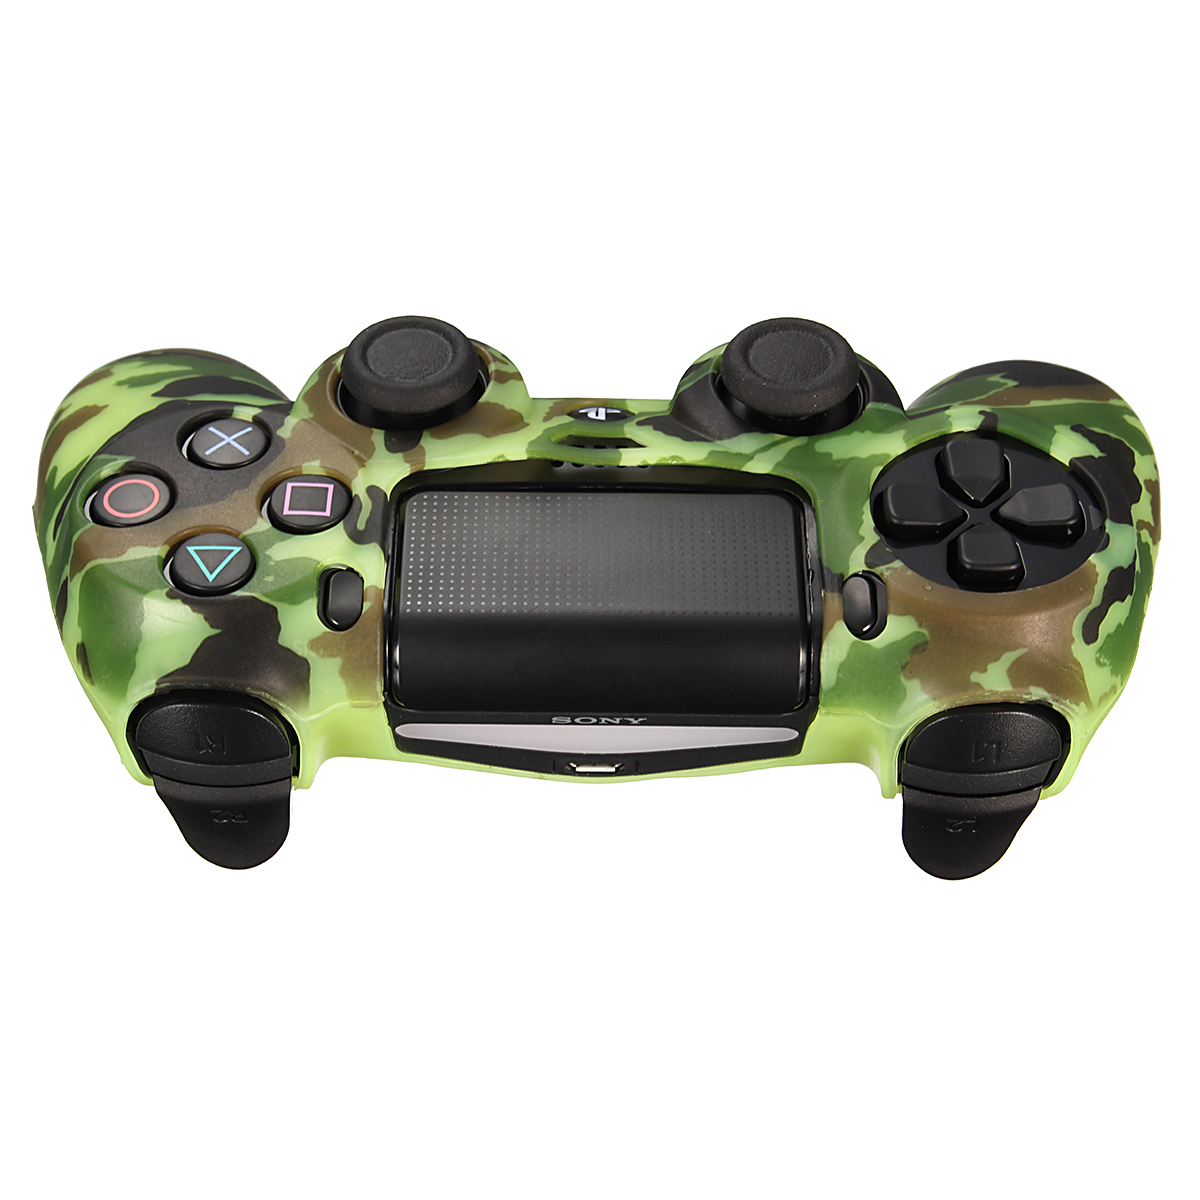 Durable Decal Camouflage Grip Cover Case Silicone Rubber Soft Skin Protector for Playstation 4 for Dualshock 4 Gamepad 52